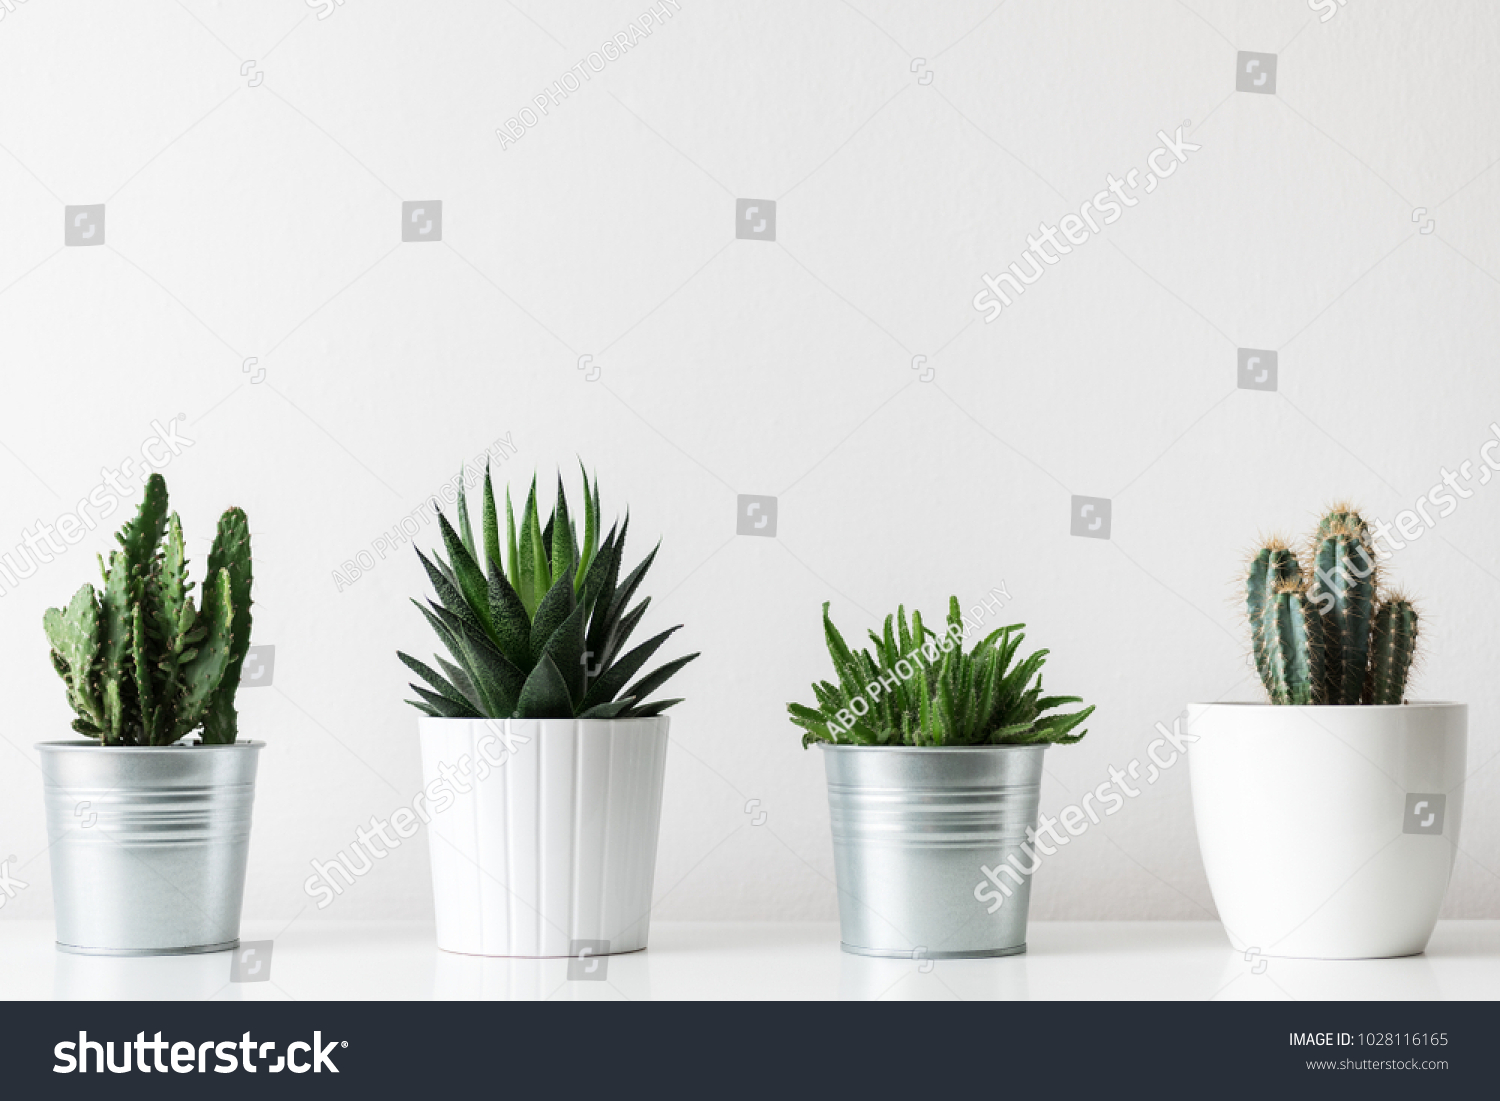 Collection of various cactus and succulent plants in different pots. Potted cactus house plants on white shelf against white wall. #1028116165